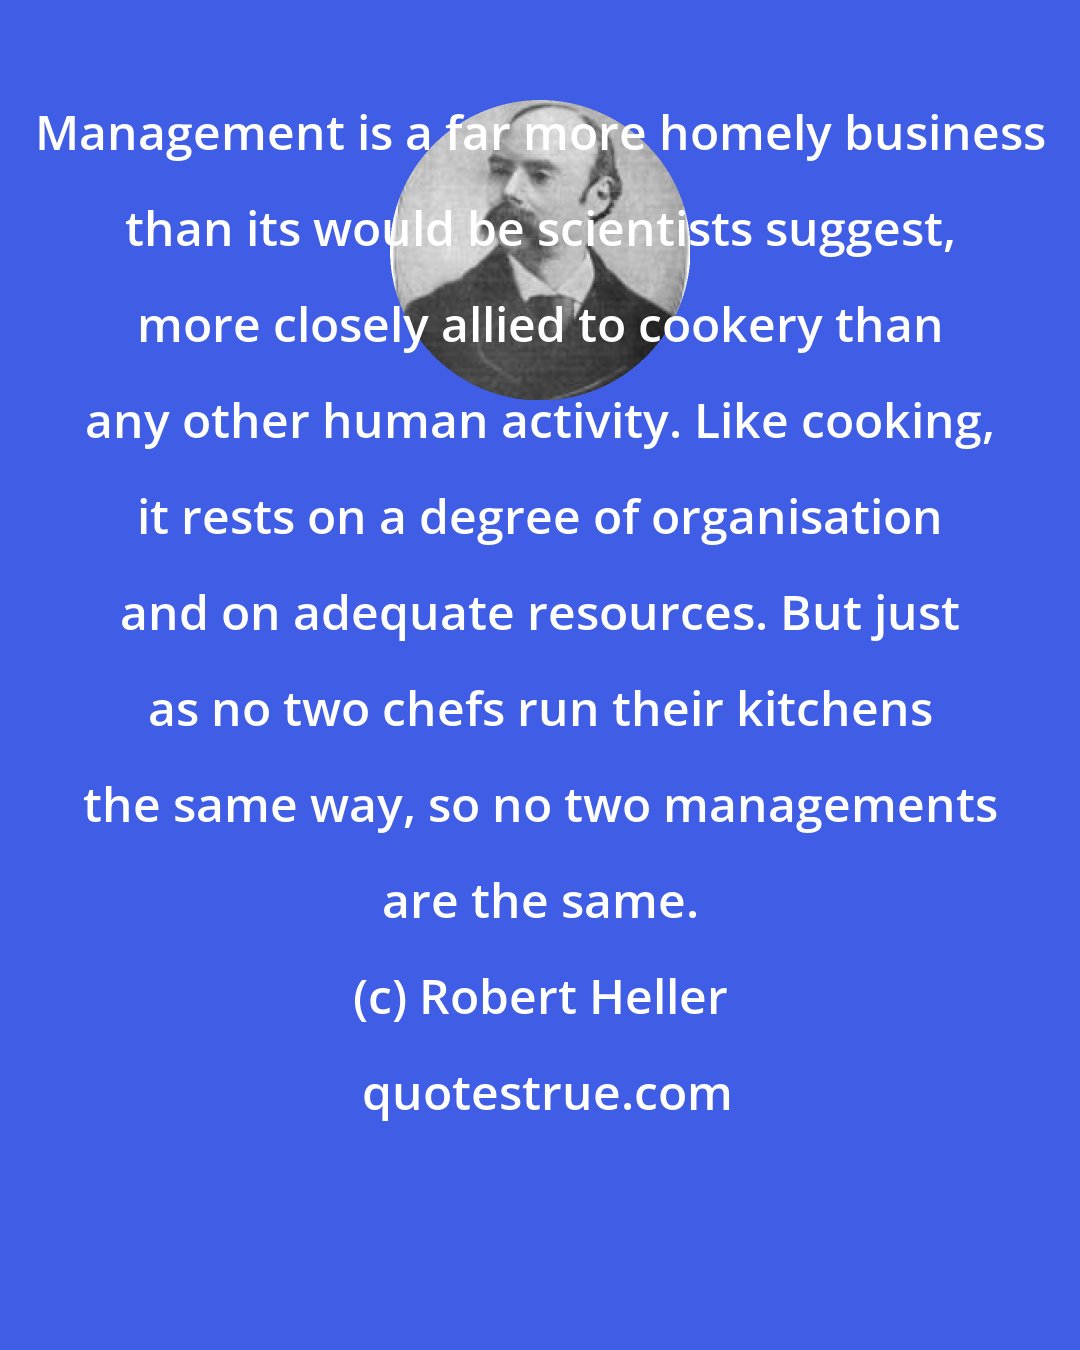 Robert Heller: Management is a far more homely business than its would be scientists suggest, more closely allied to cookery than any other human activity. Like cooking, it rests on a degree of organisation and on adequate resources. But just as no two chefs run their kitchens the same way, so no two managements are the same.